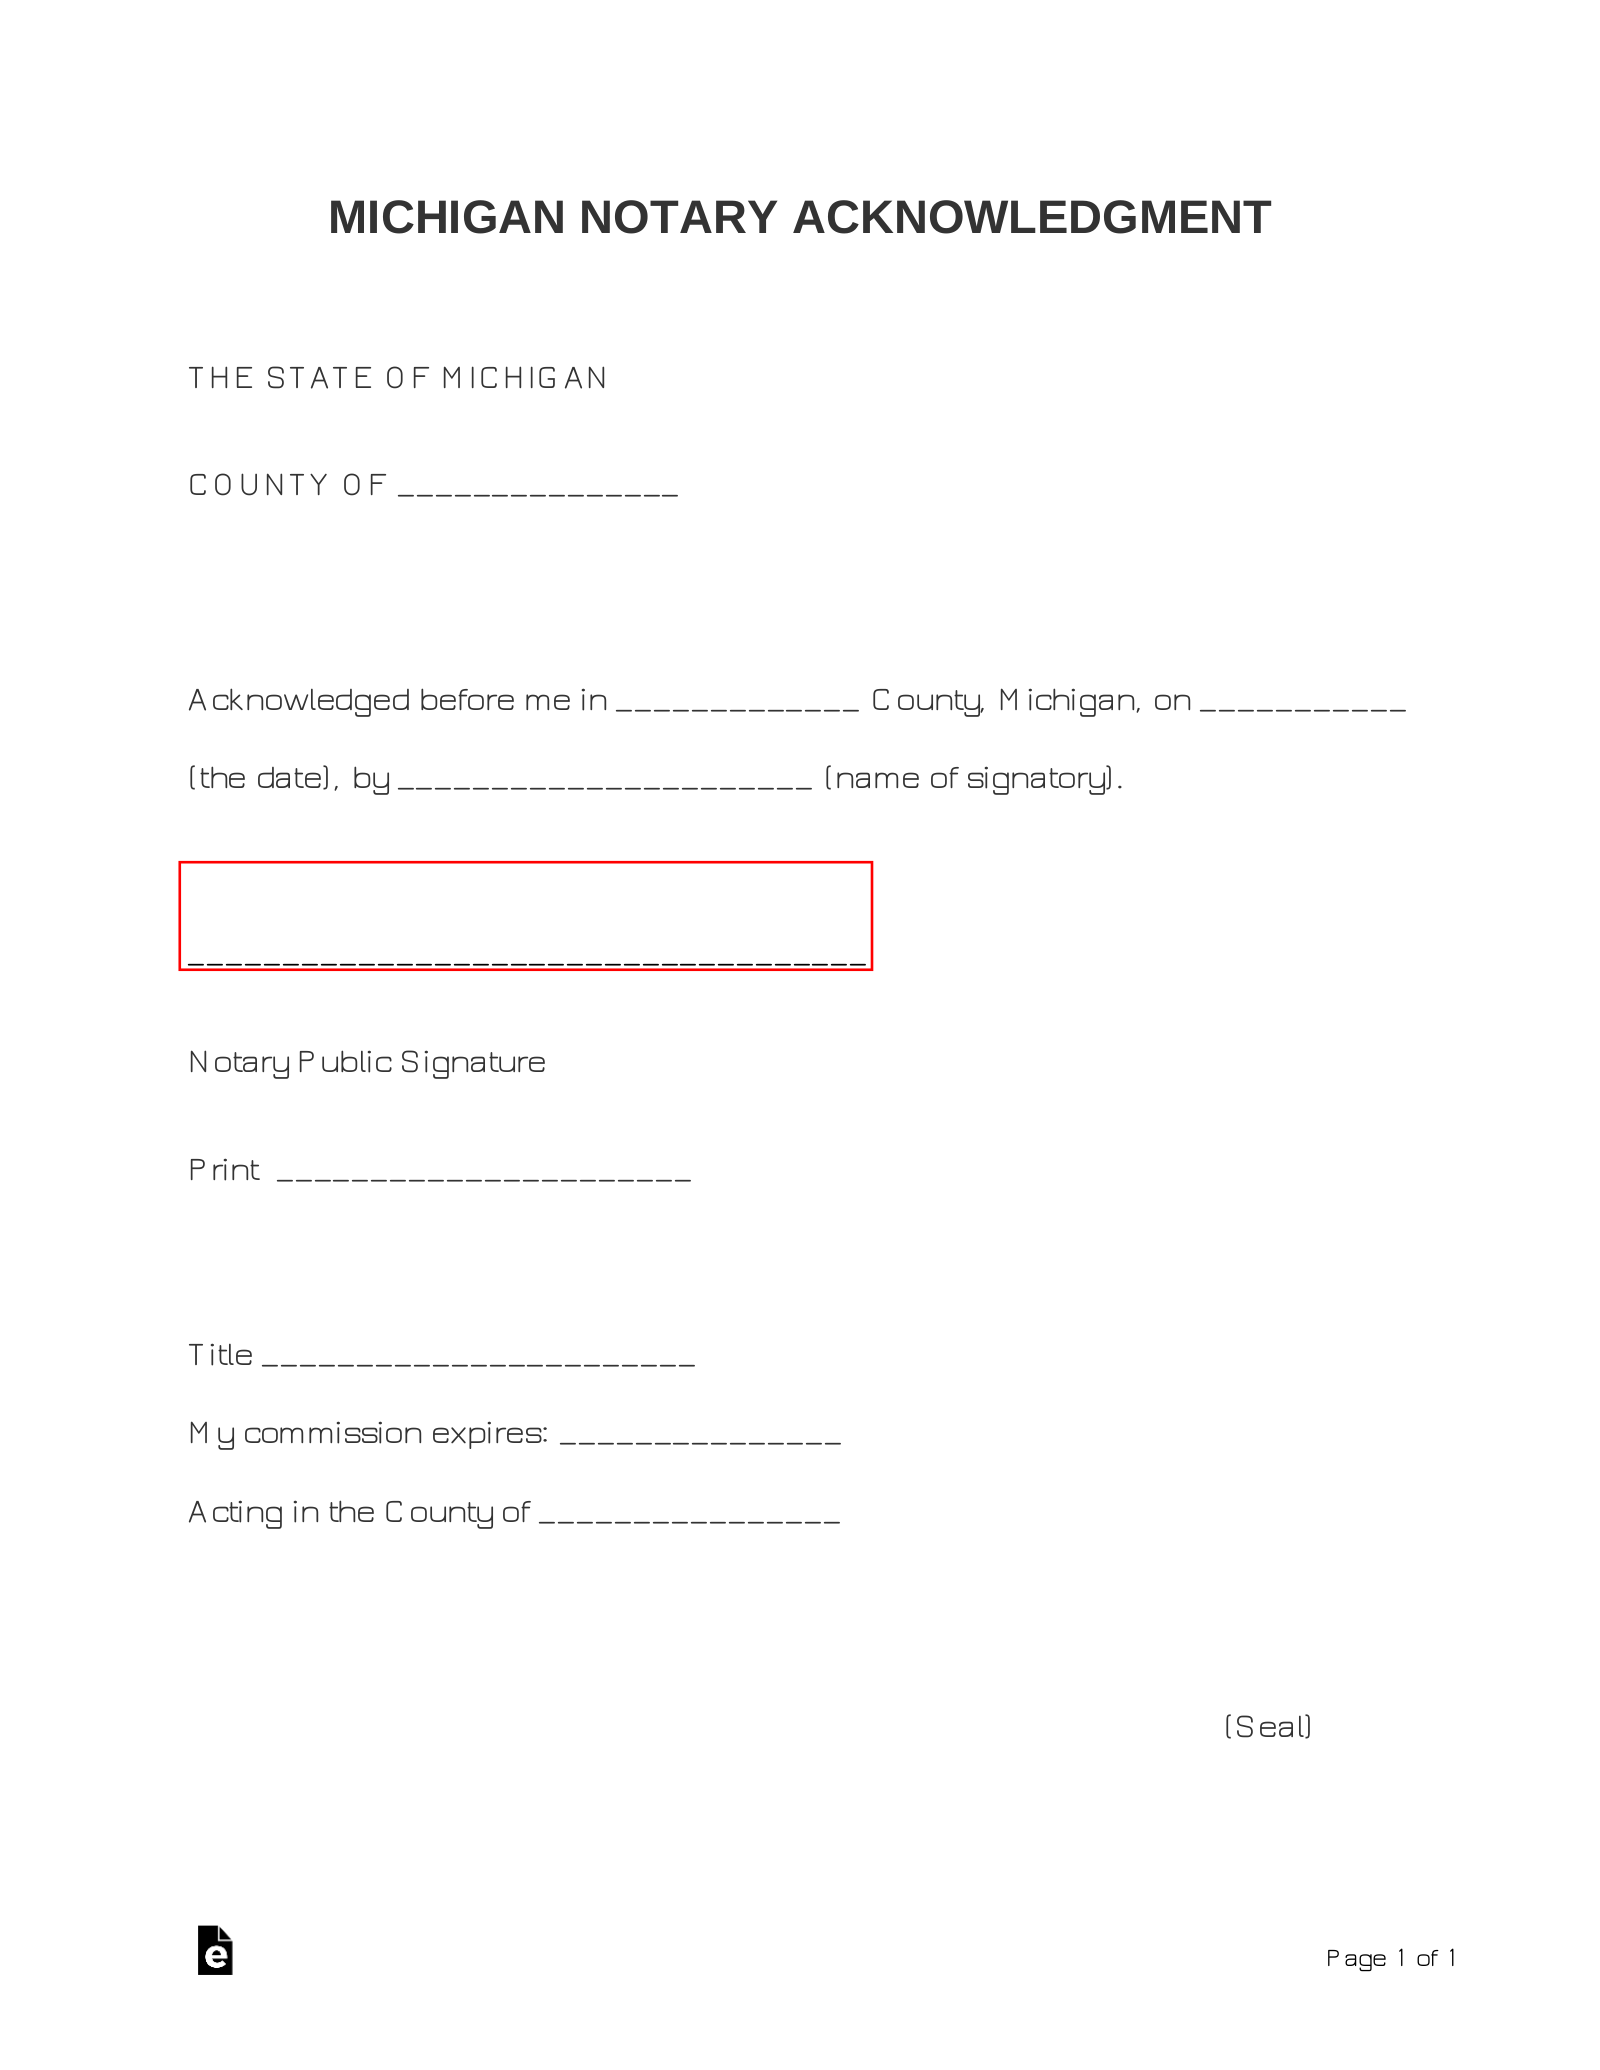 Michigan Notary Acknowledgment Form